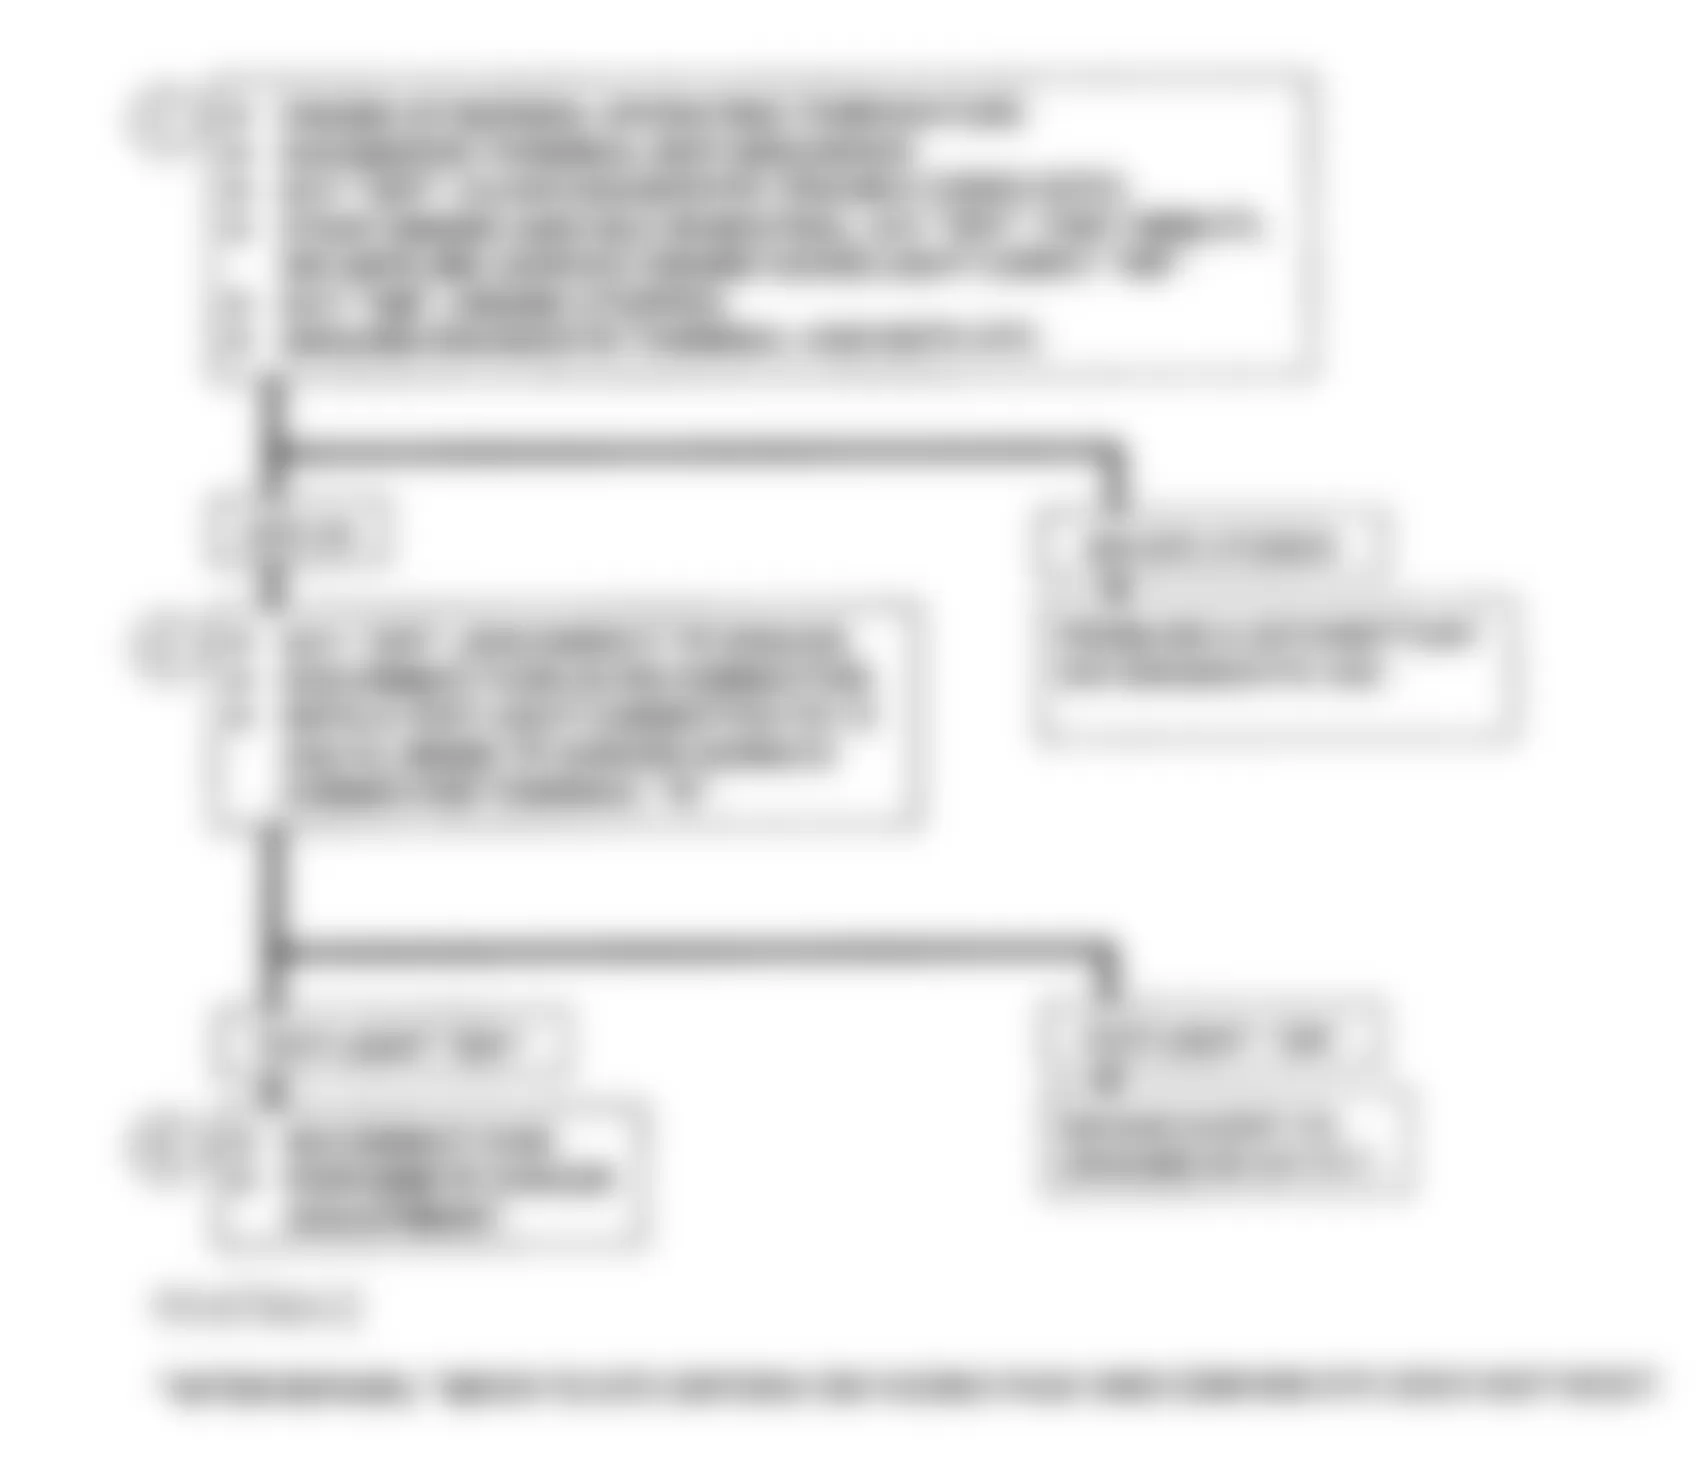 Chevrolet C3500 HD 1993 - Component Locations -  DTC 23, Flowchart, TPS Misadjusted